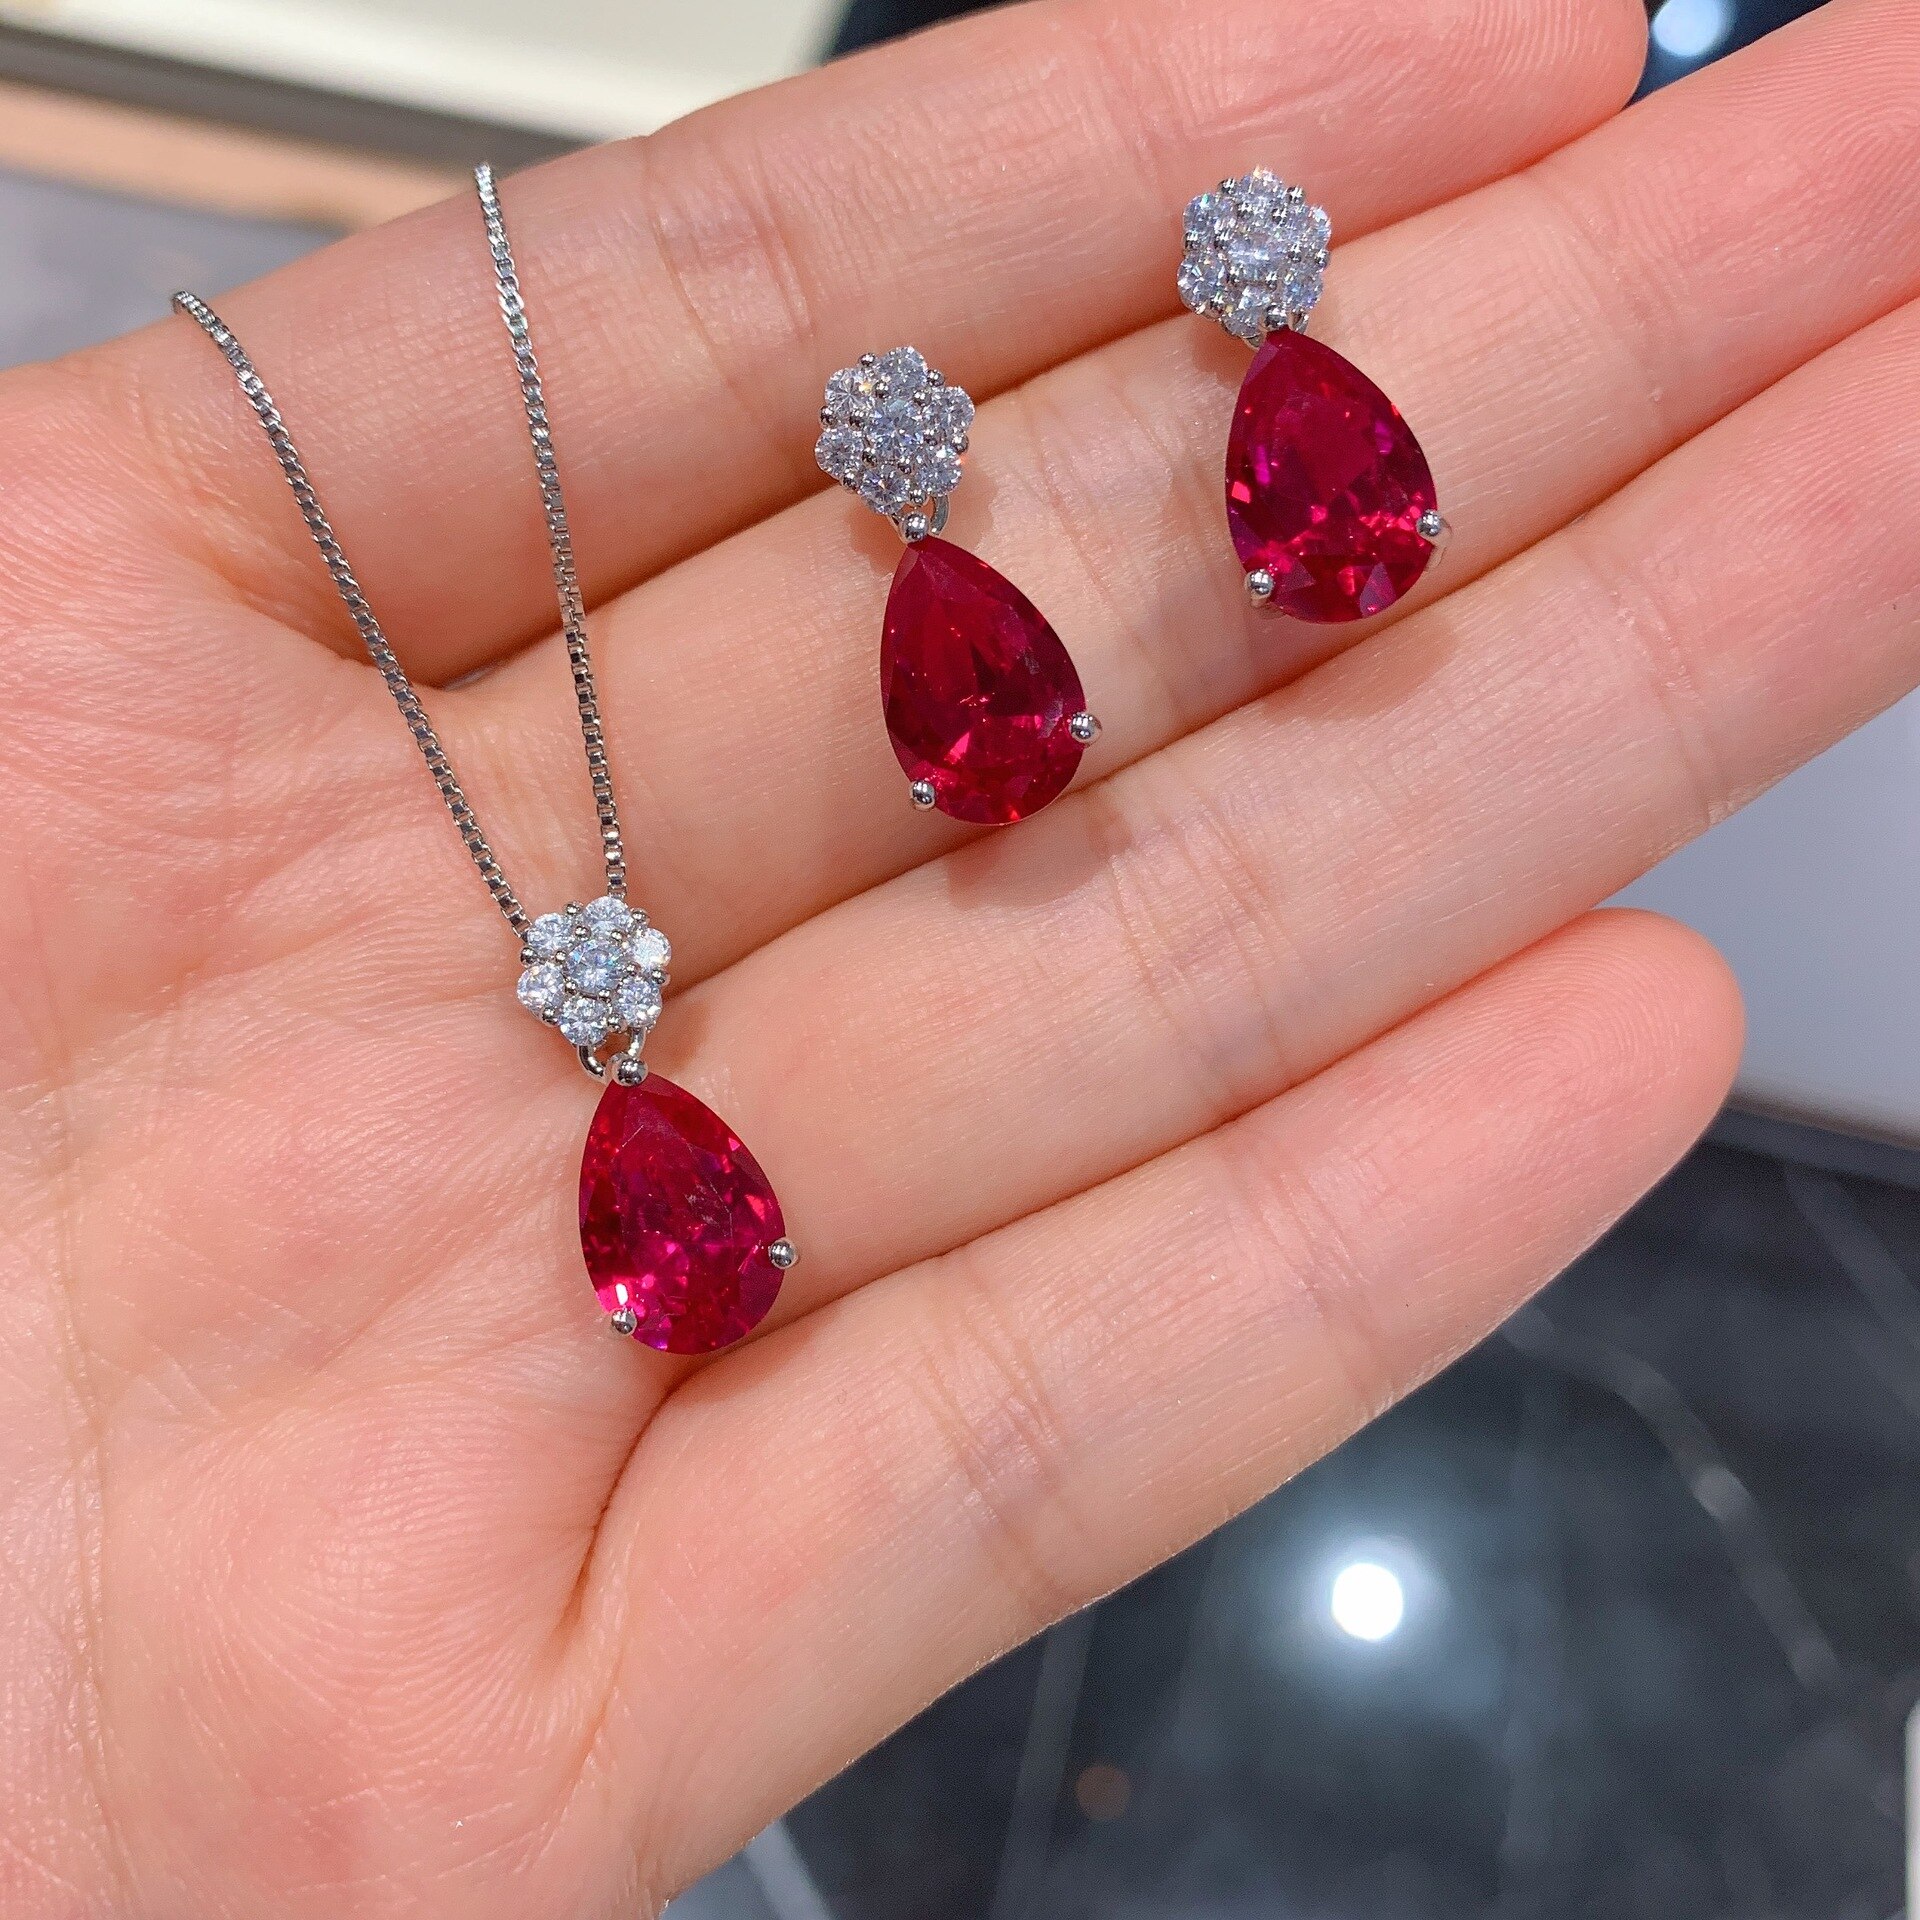 Charms-Water-Droplet-Small-Flower-Ruby-High-Carbon-Diamond-Earrings-Pendant-Necklace-for-Women-Jewelry-Wedding-1.jpg